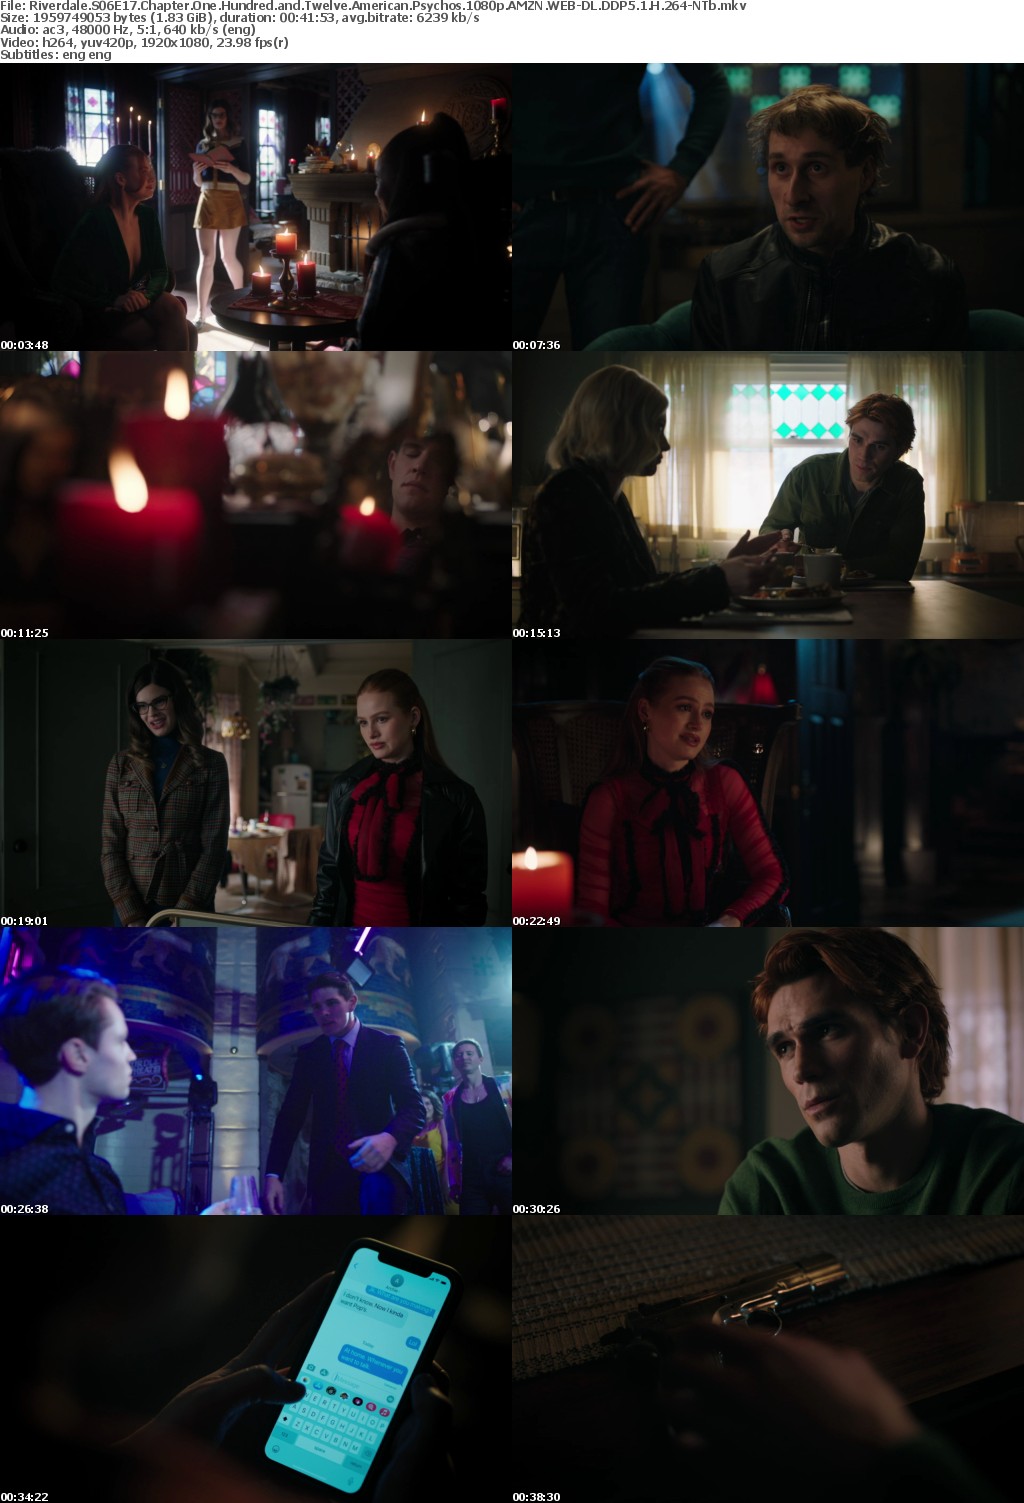 Riverdale US S06E17 Chapter One Hundred and Twelve American Psychos 1080p AMZN WEBRip DDP5 1 x264-NTb